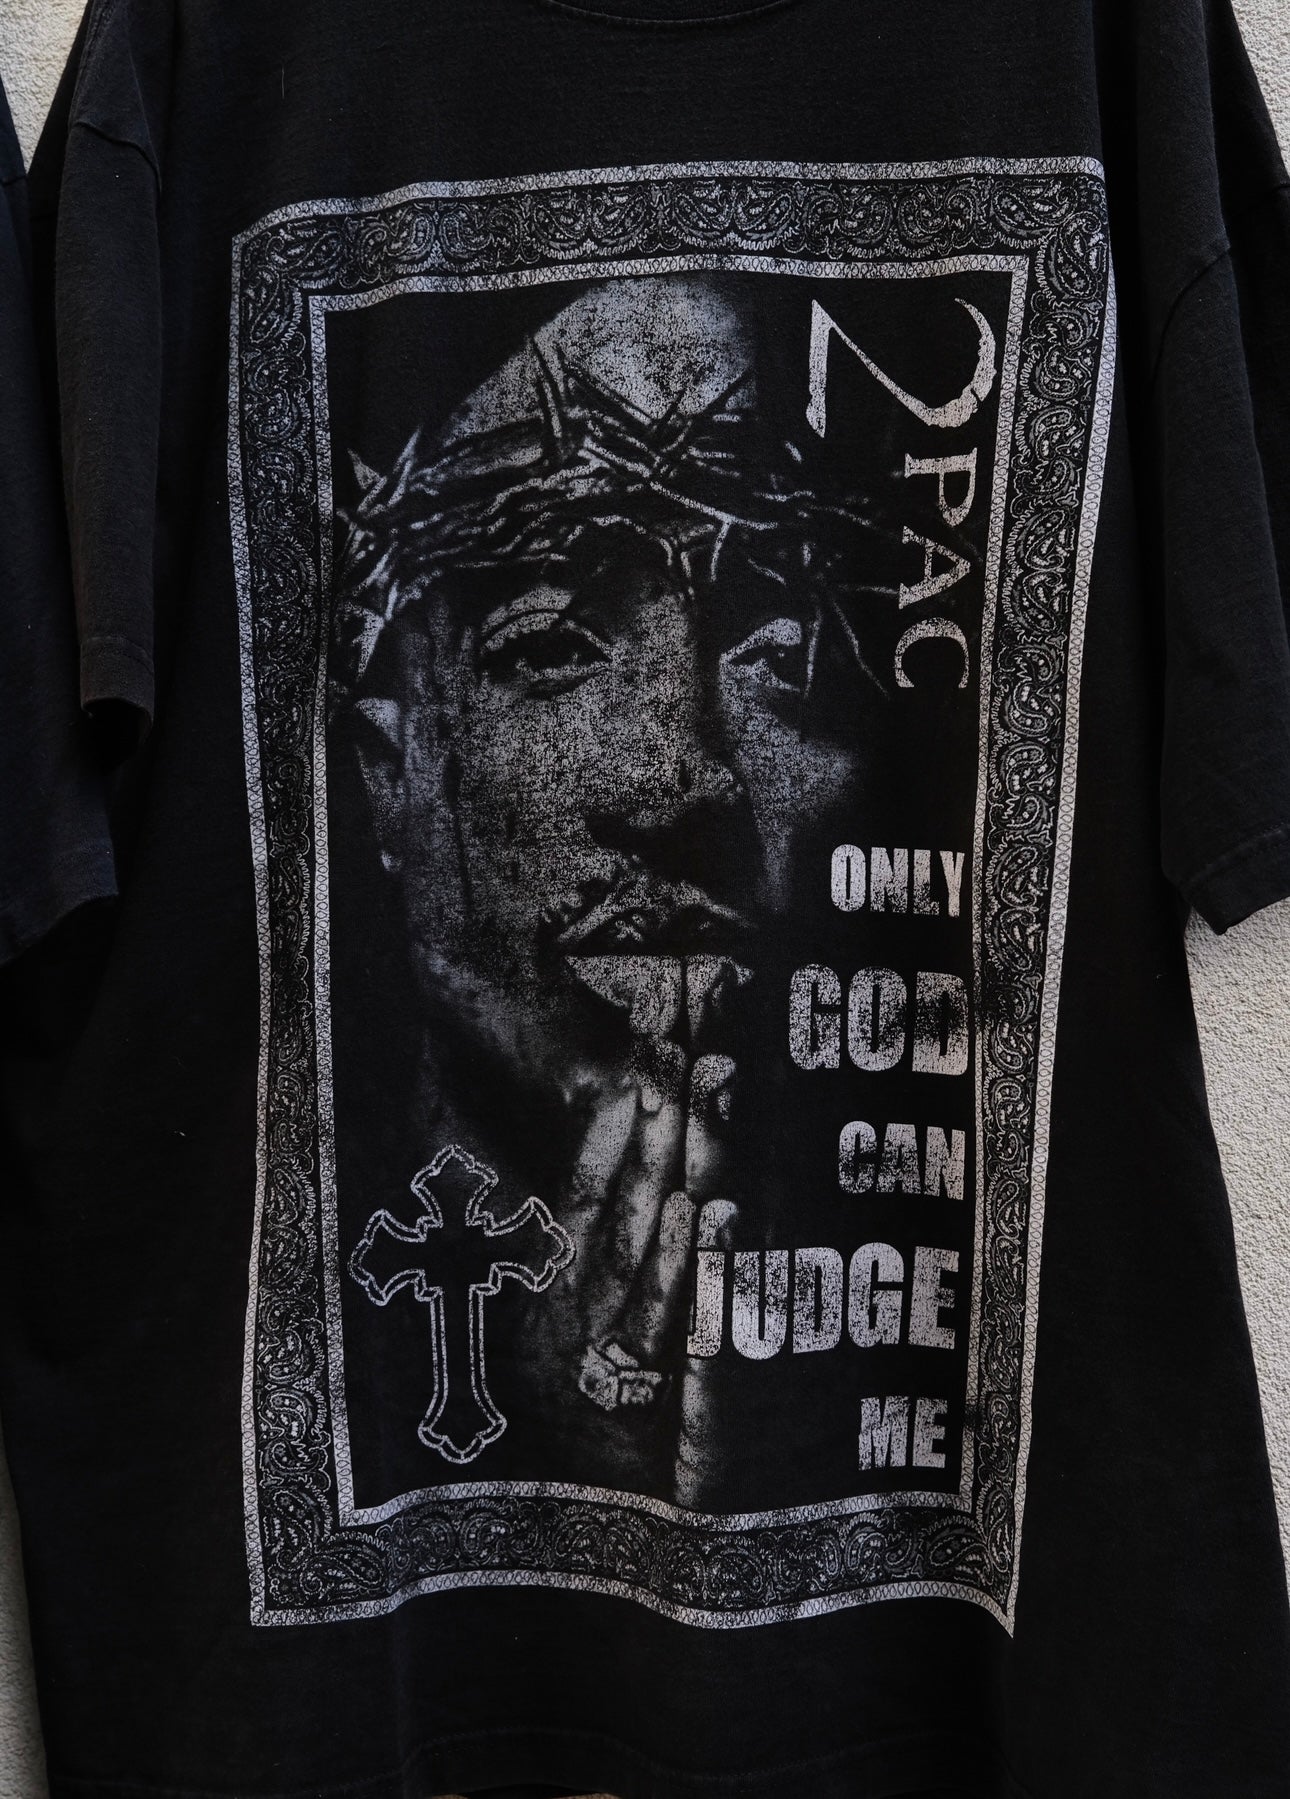 2pac “Only God Can Judge Me” T-Shirt